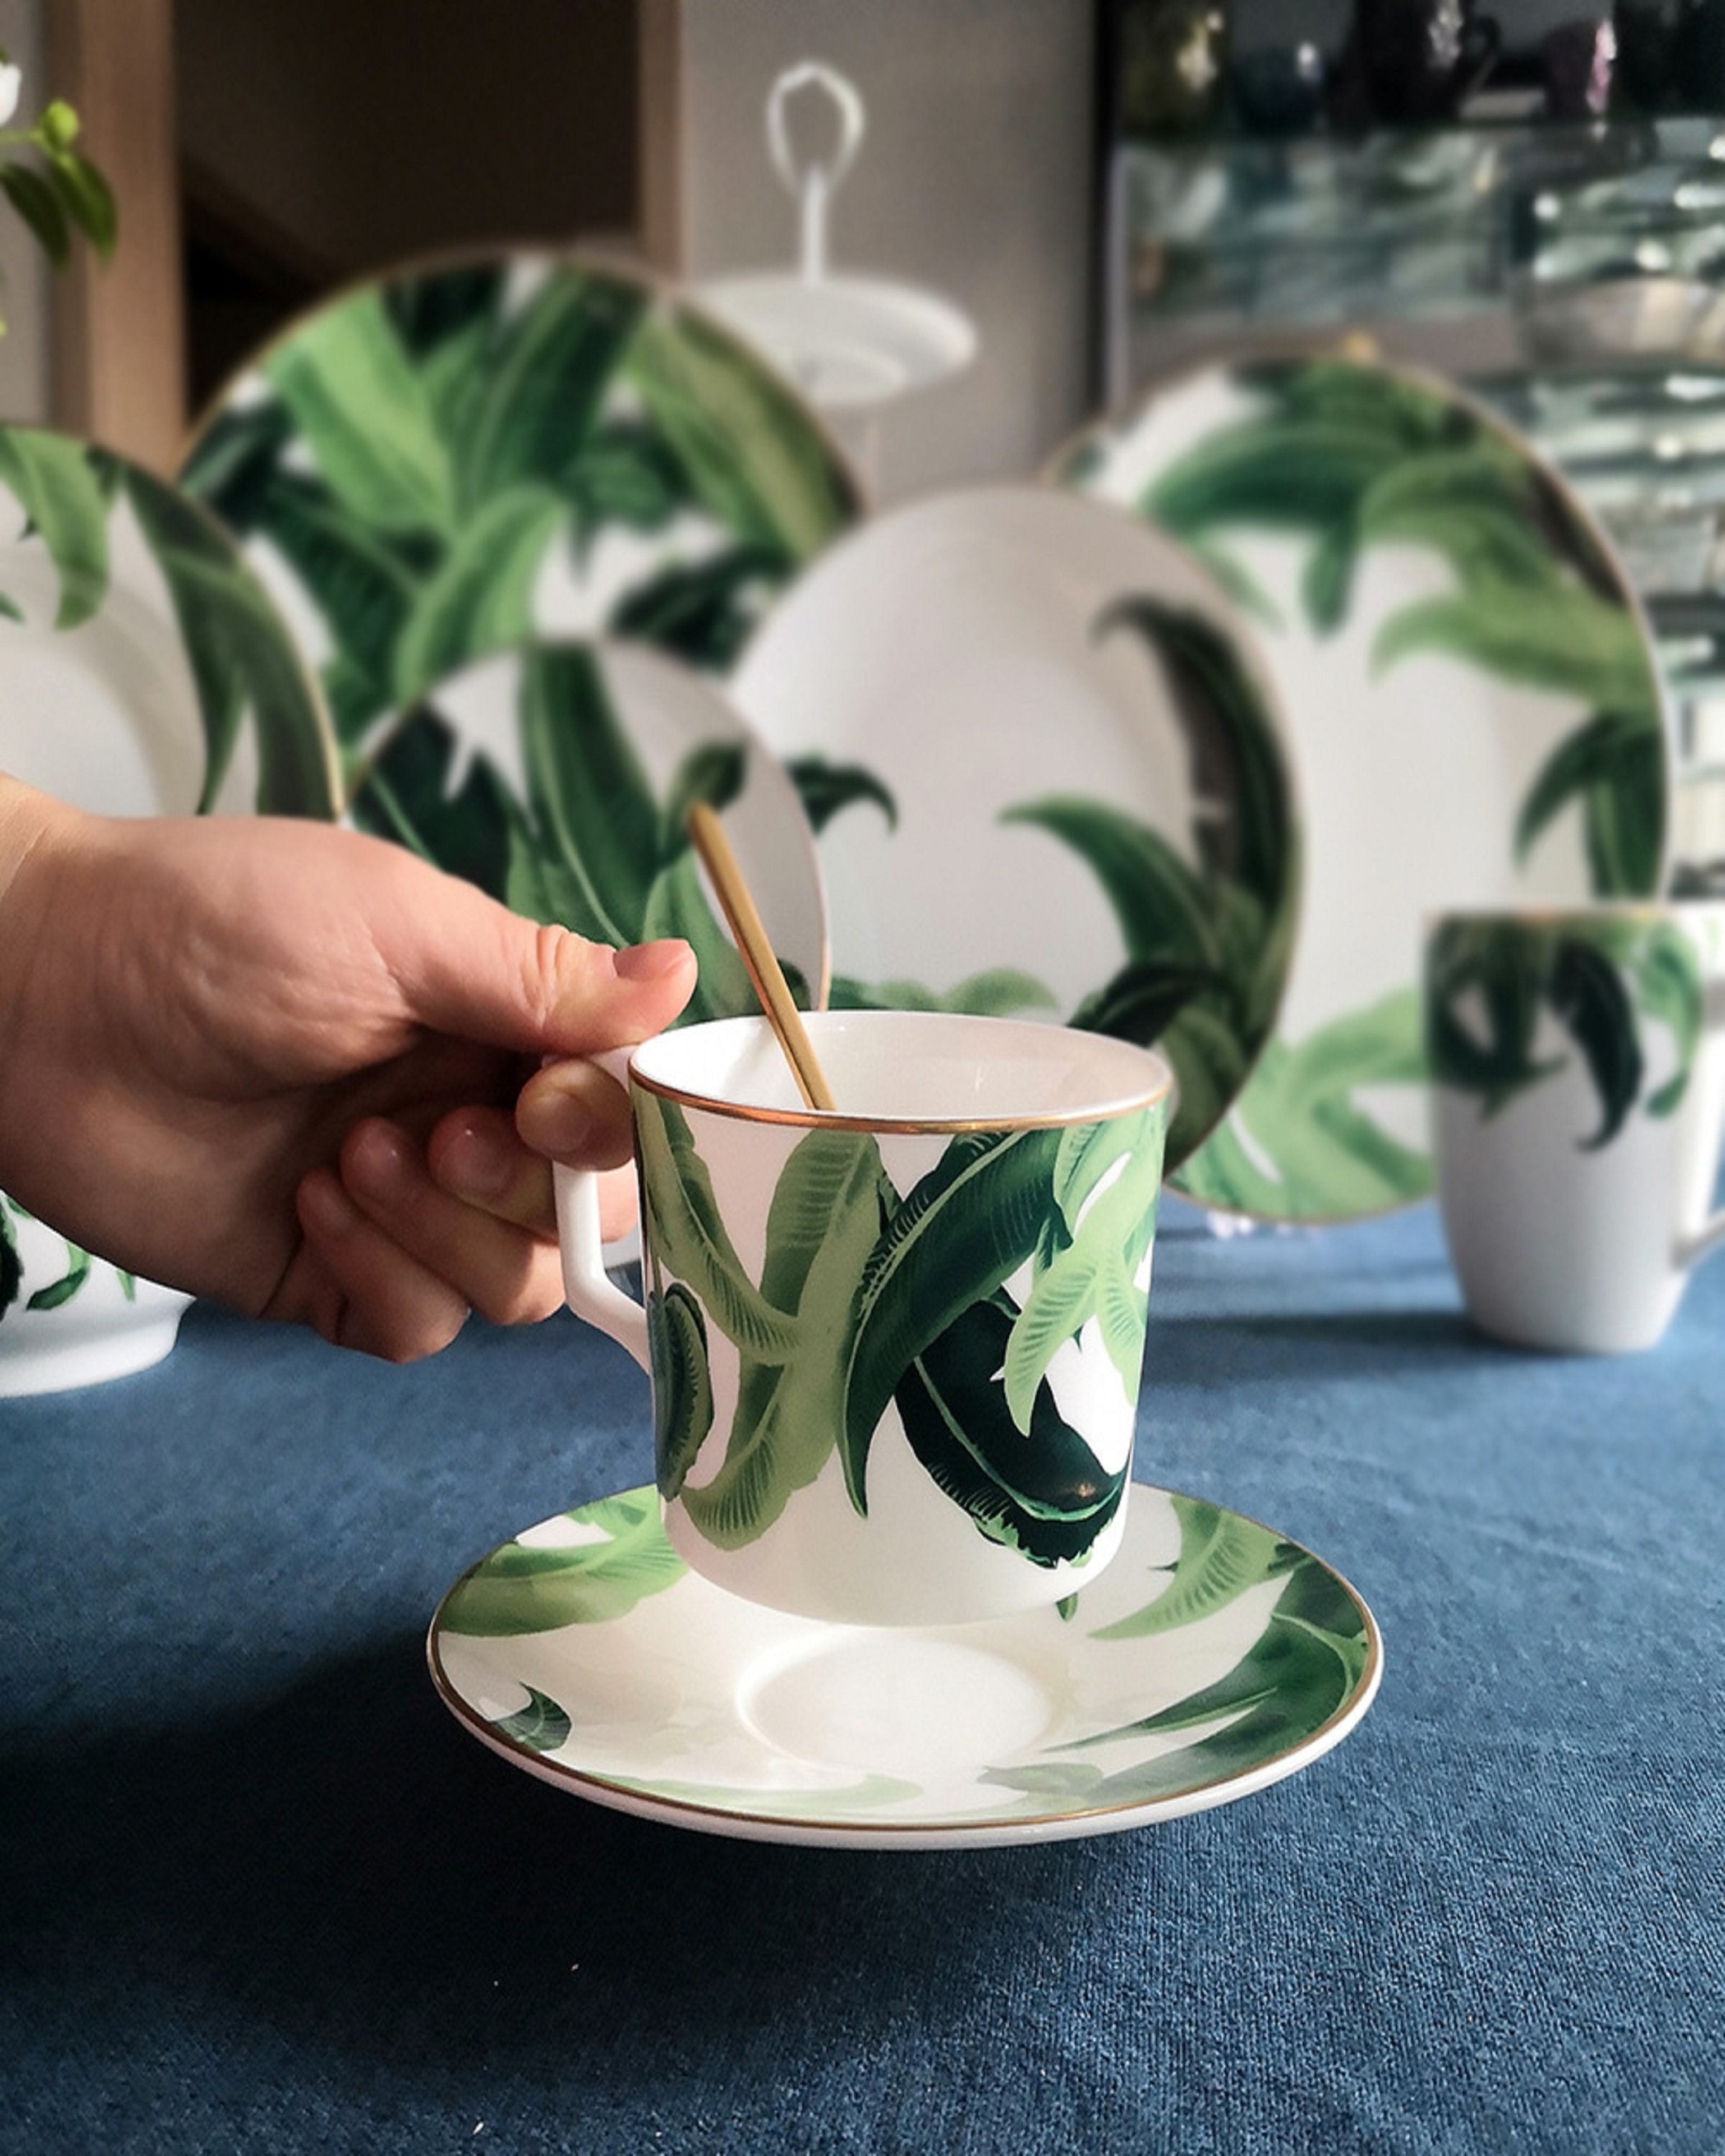 Shop Bone China Cups And Saucer Sets Online